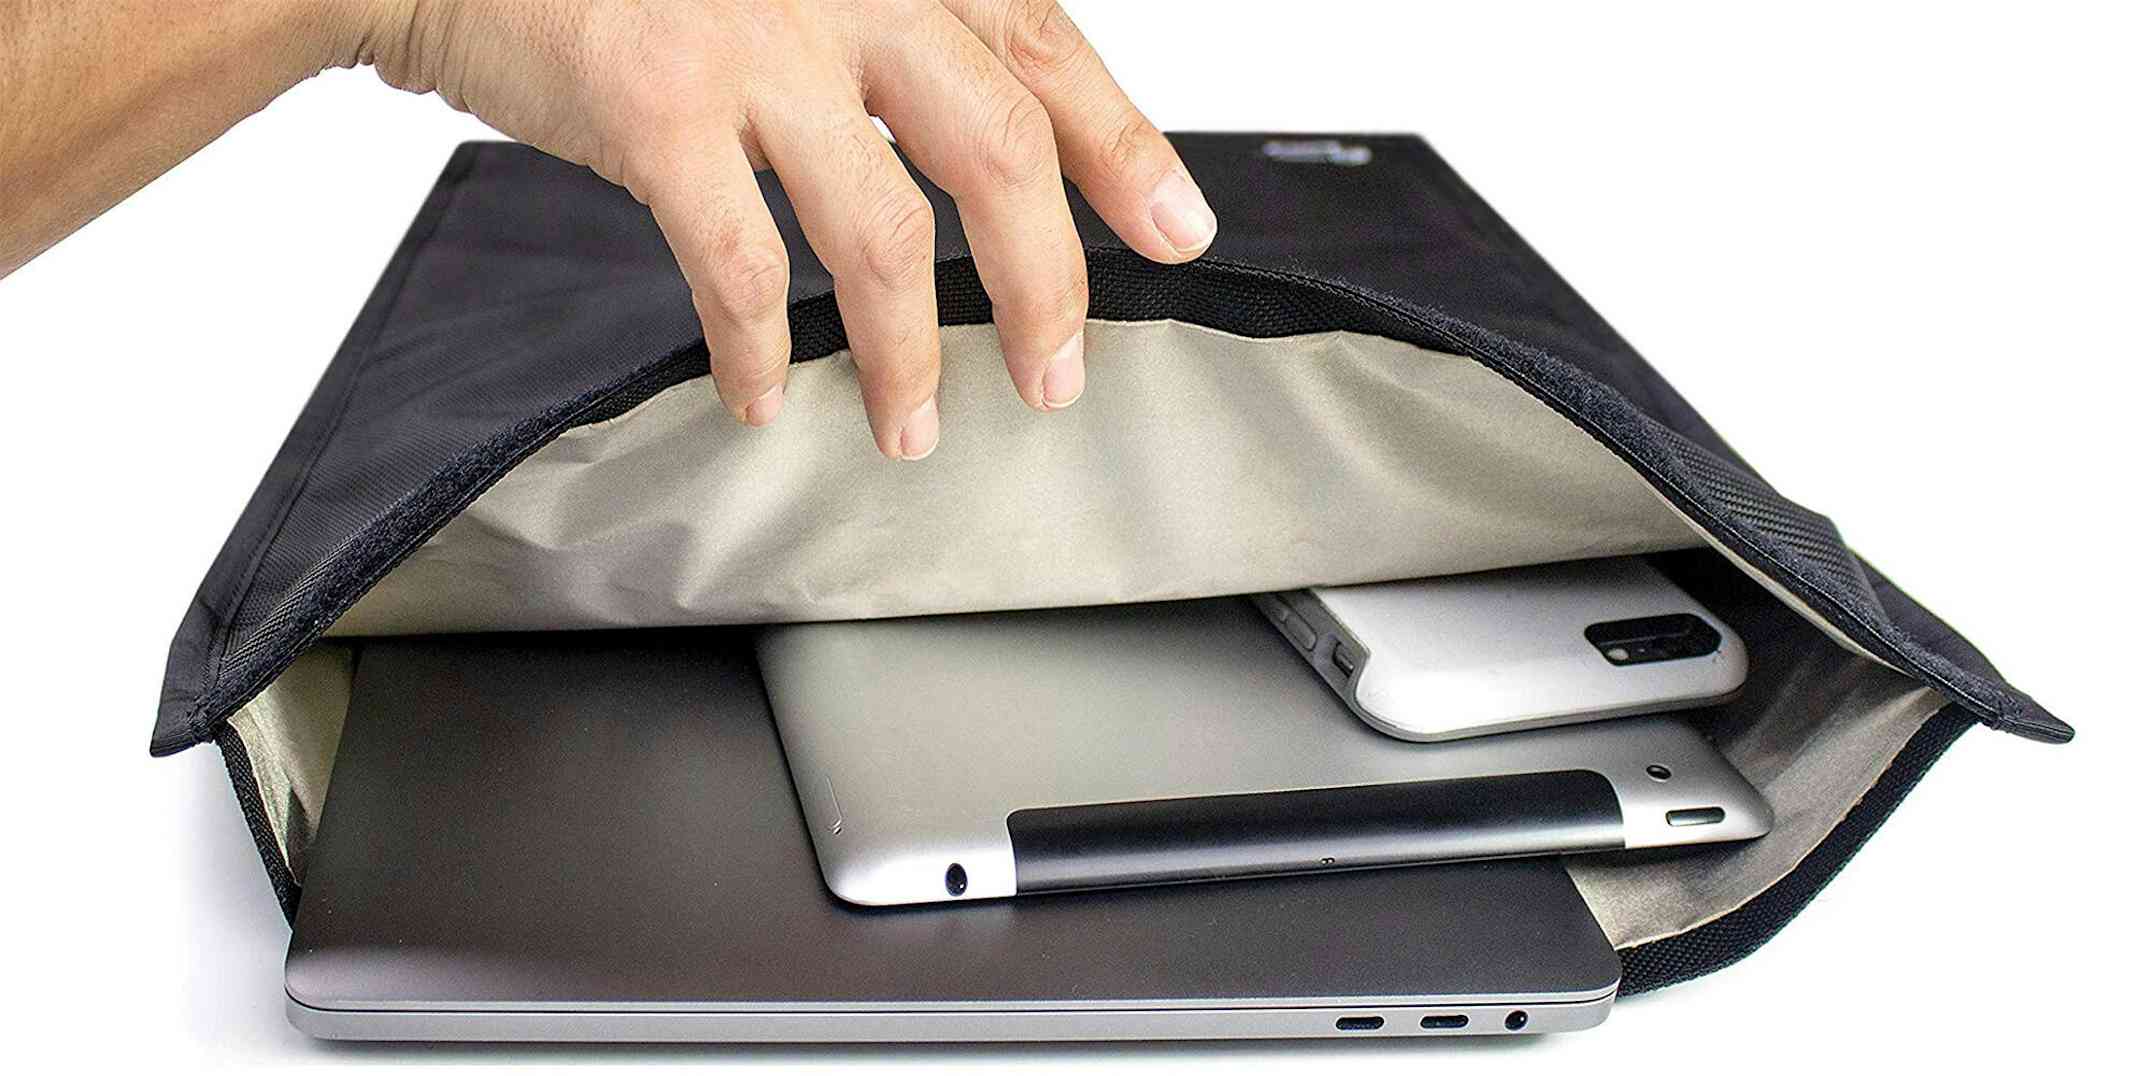 Pickpocket-Proof and RFID-Blocking Gear to Keep Your Stuff Safe on